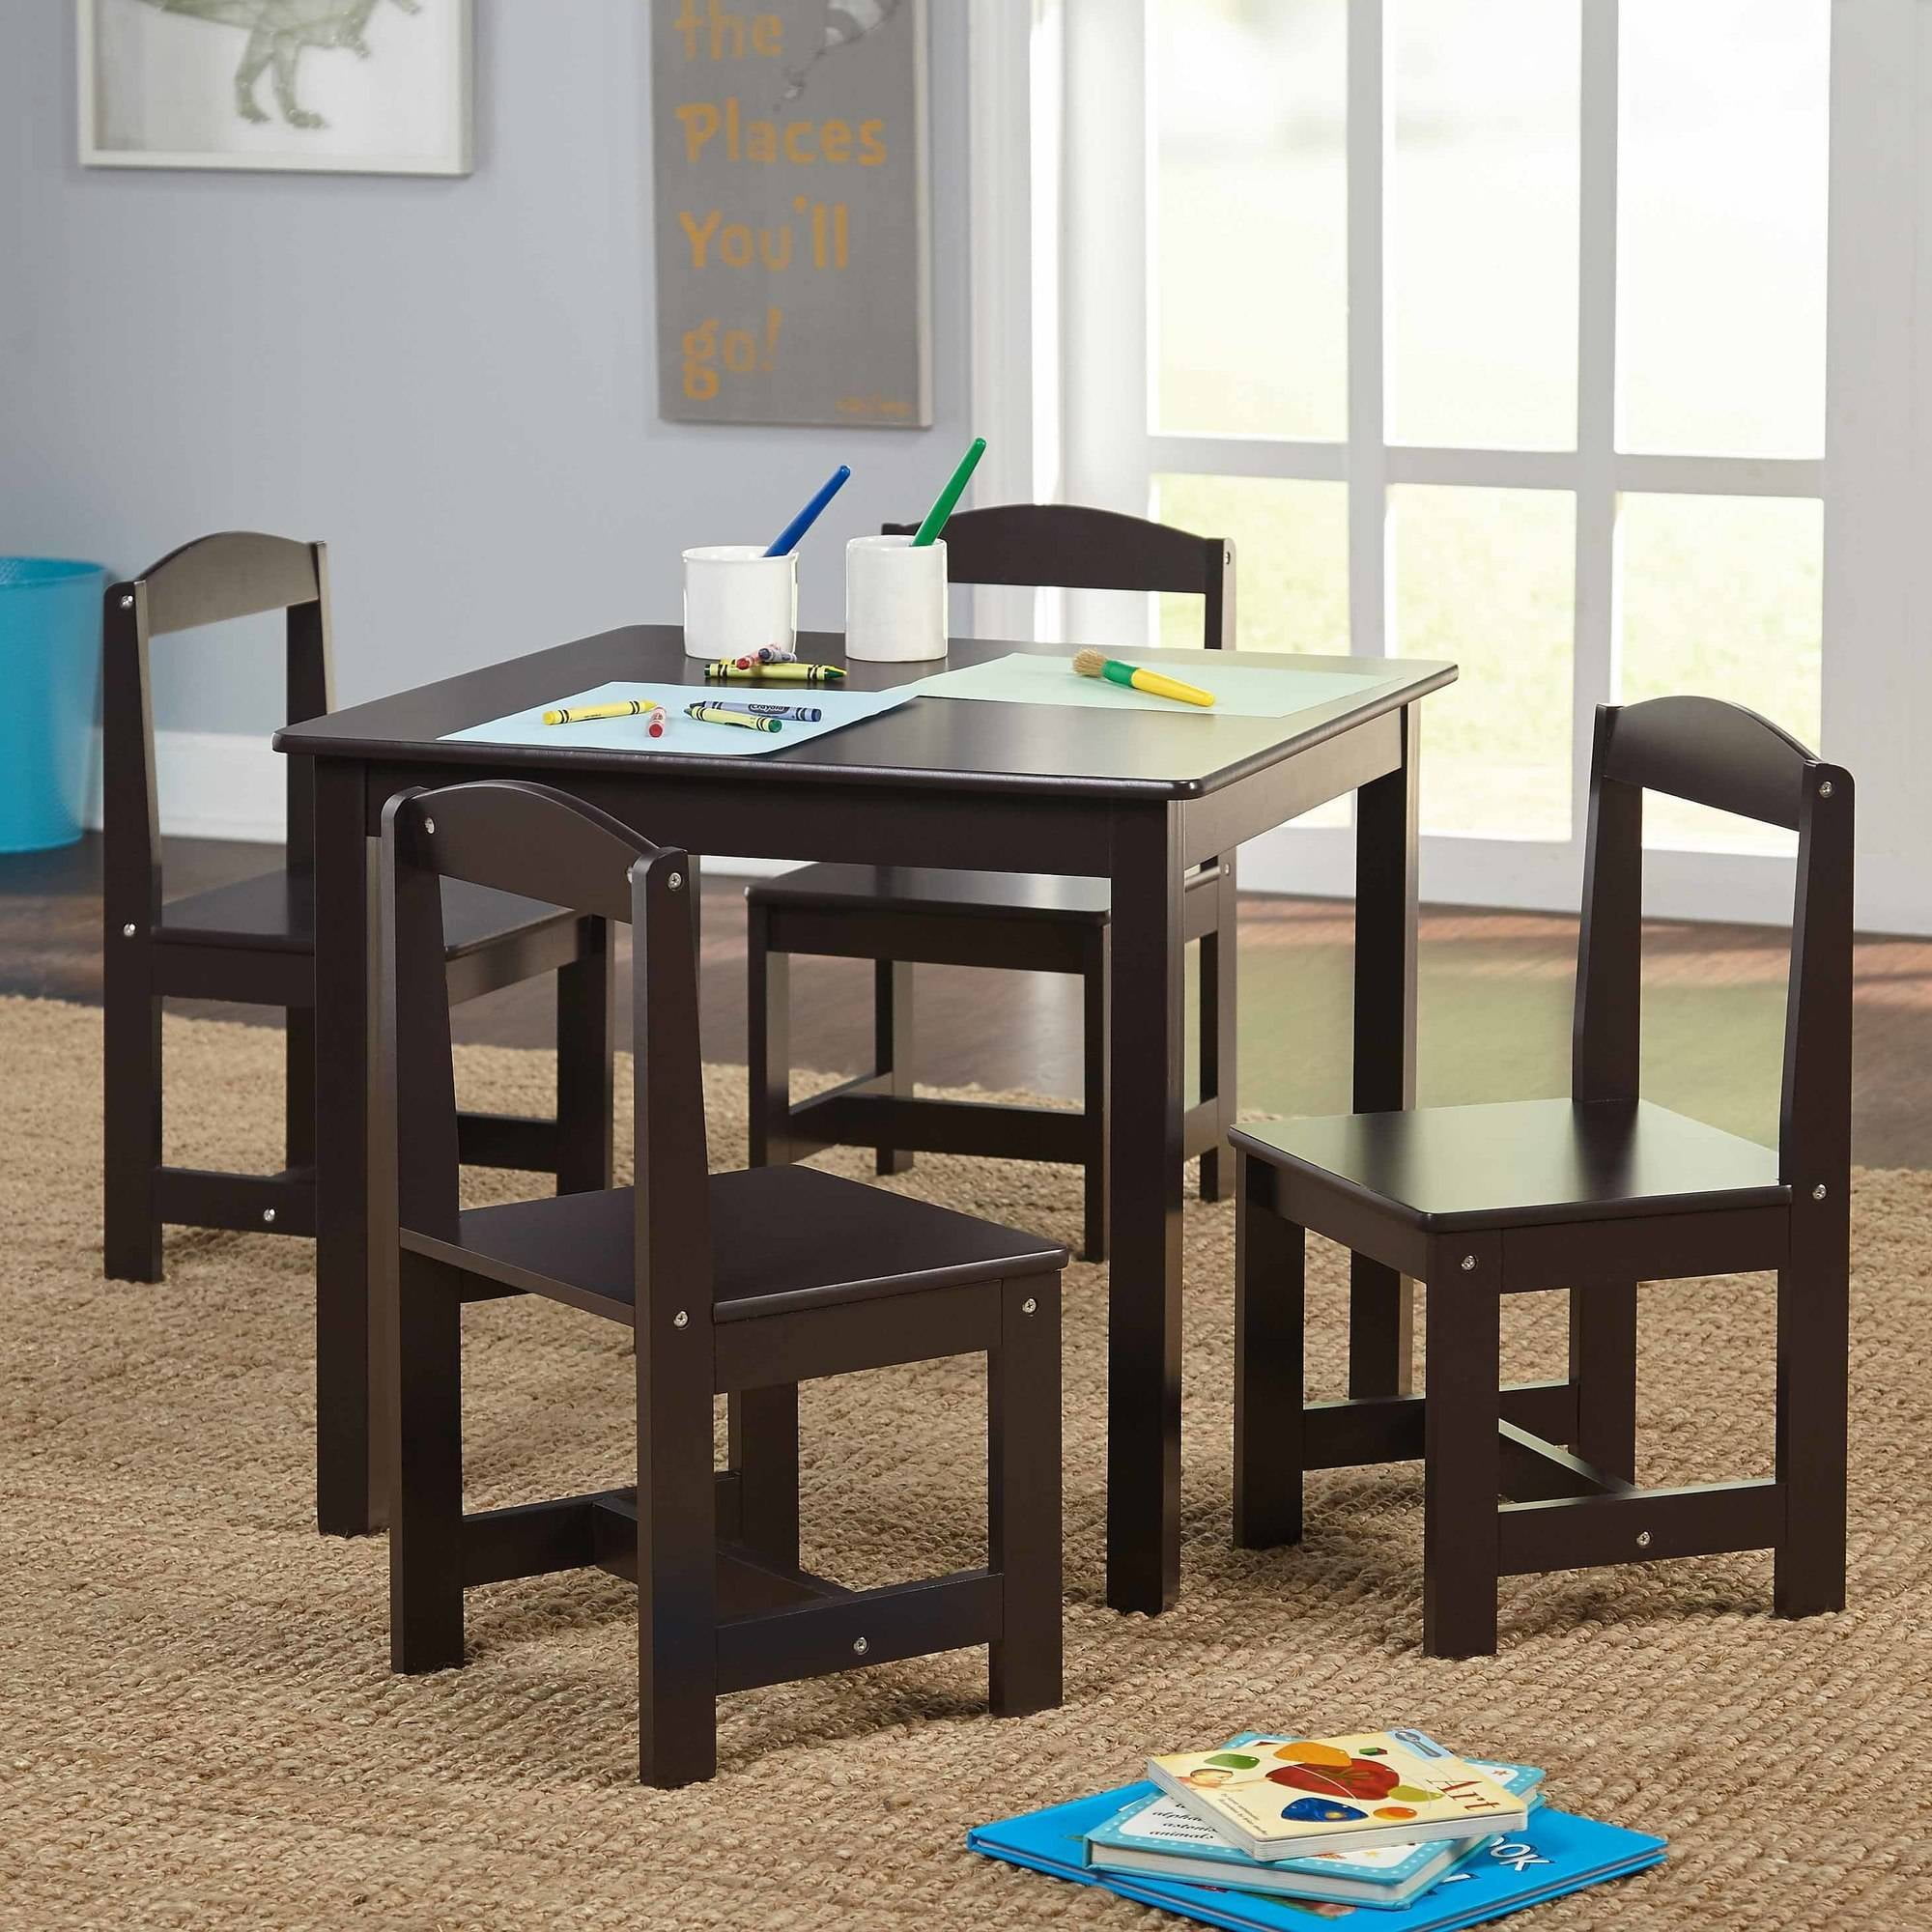 Hayden Kids 5 Piece Table and Chairs Set Toddler Wood ...